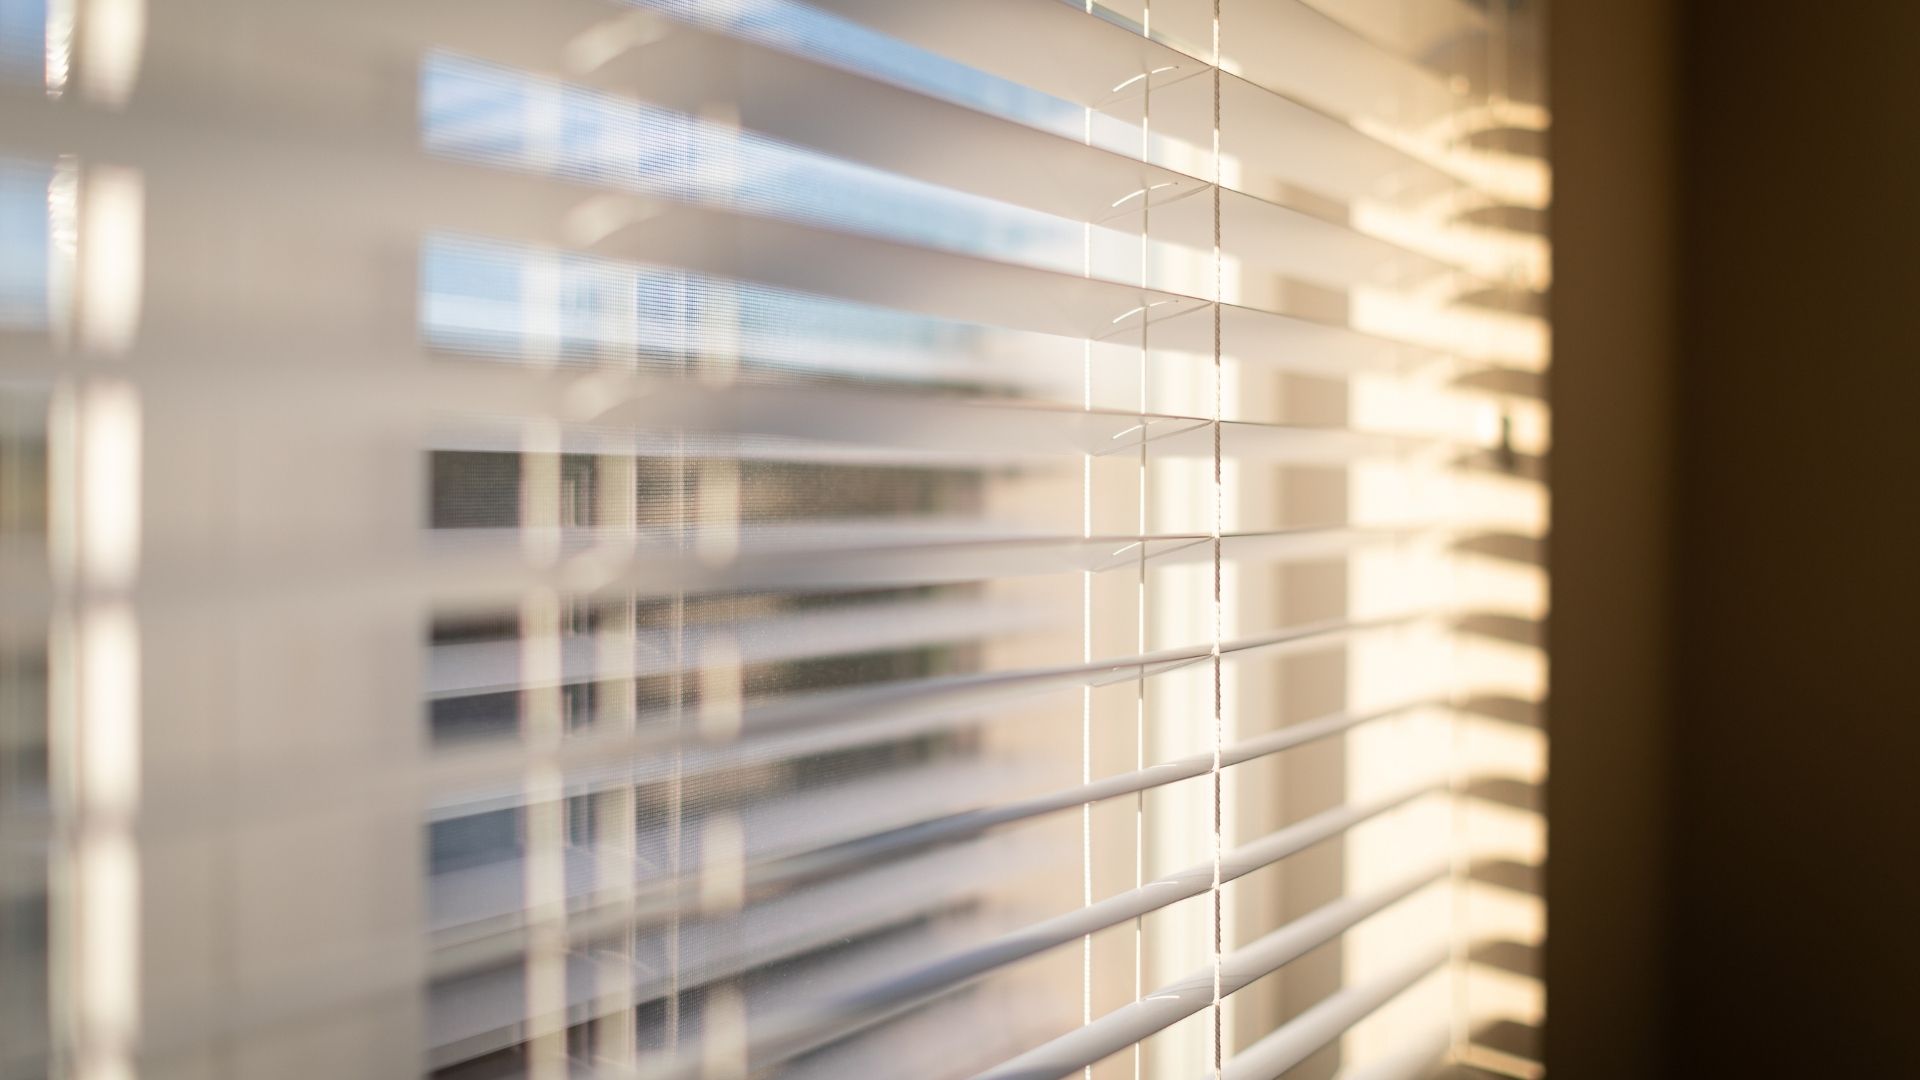 Blinds come in many types and styles as well